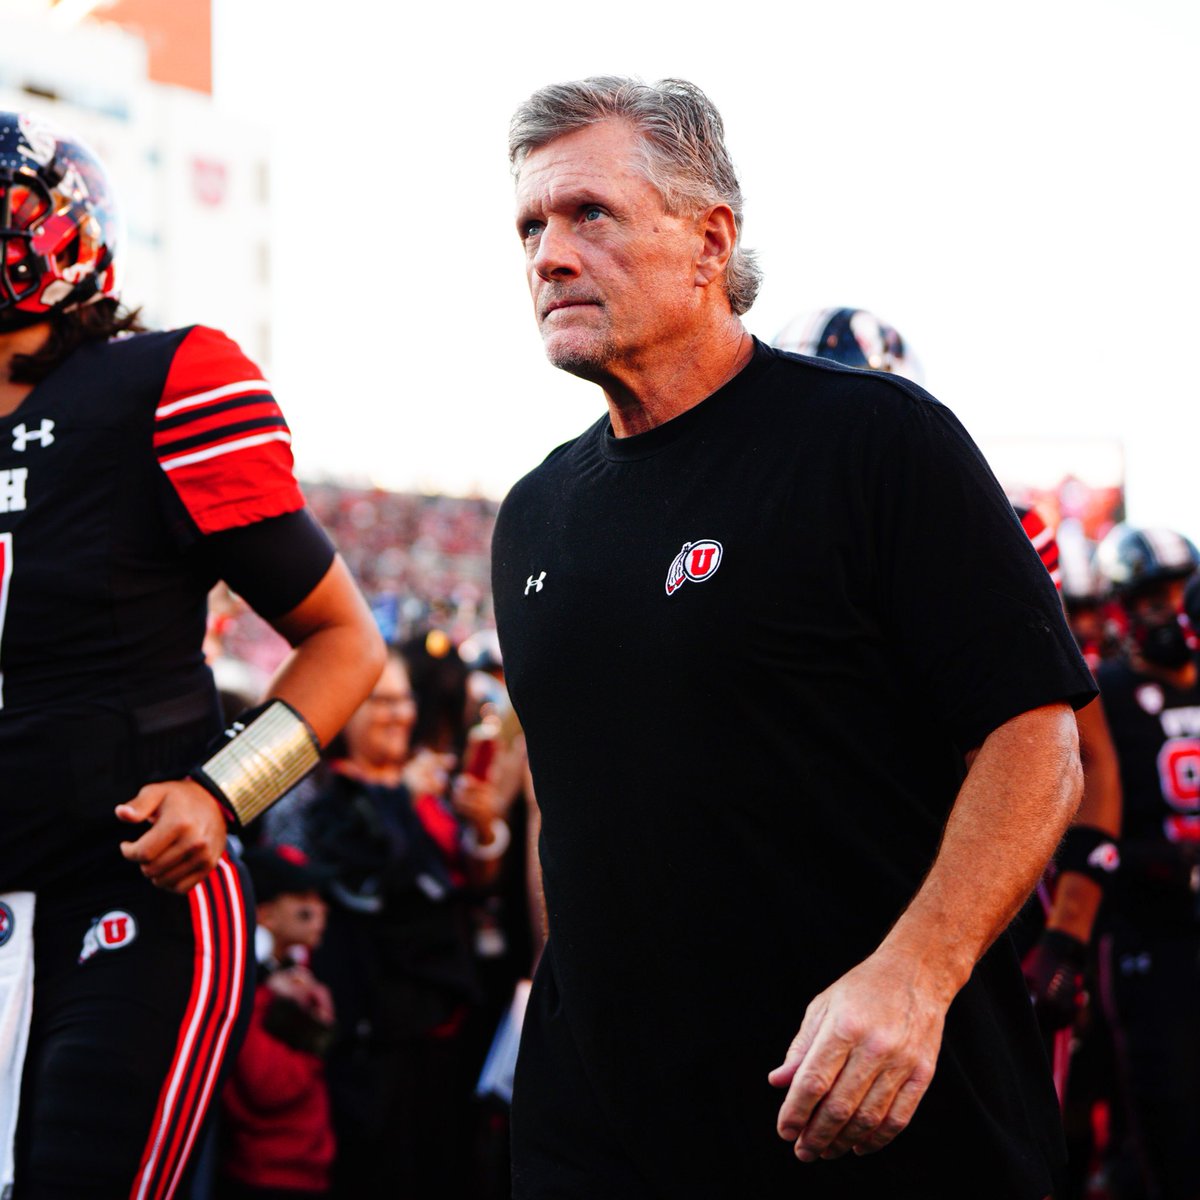 With Saturday’s victory, Coach Whittingham passed the legendary John Heisman on the all-time coaching wins list. Coach Whitt’s 149 wins has him 8th amongst active coaches all-time. #GoUtes